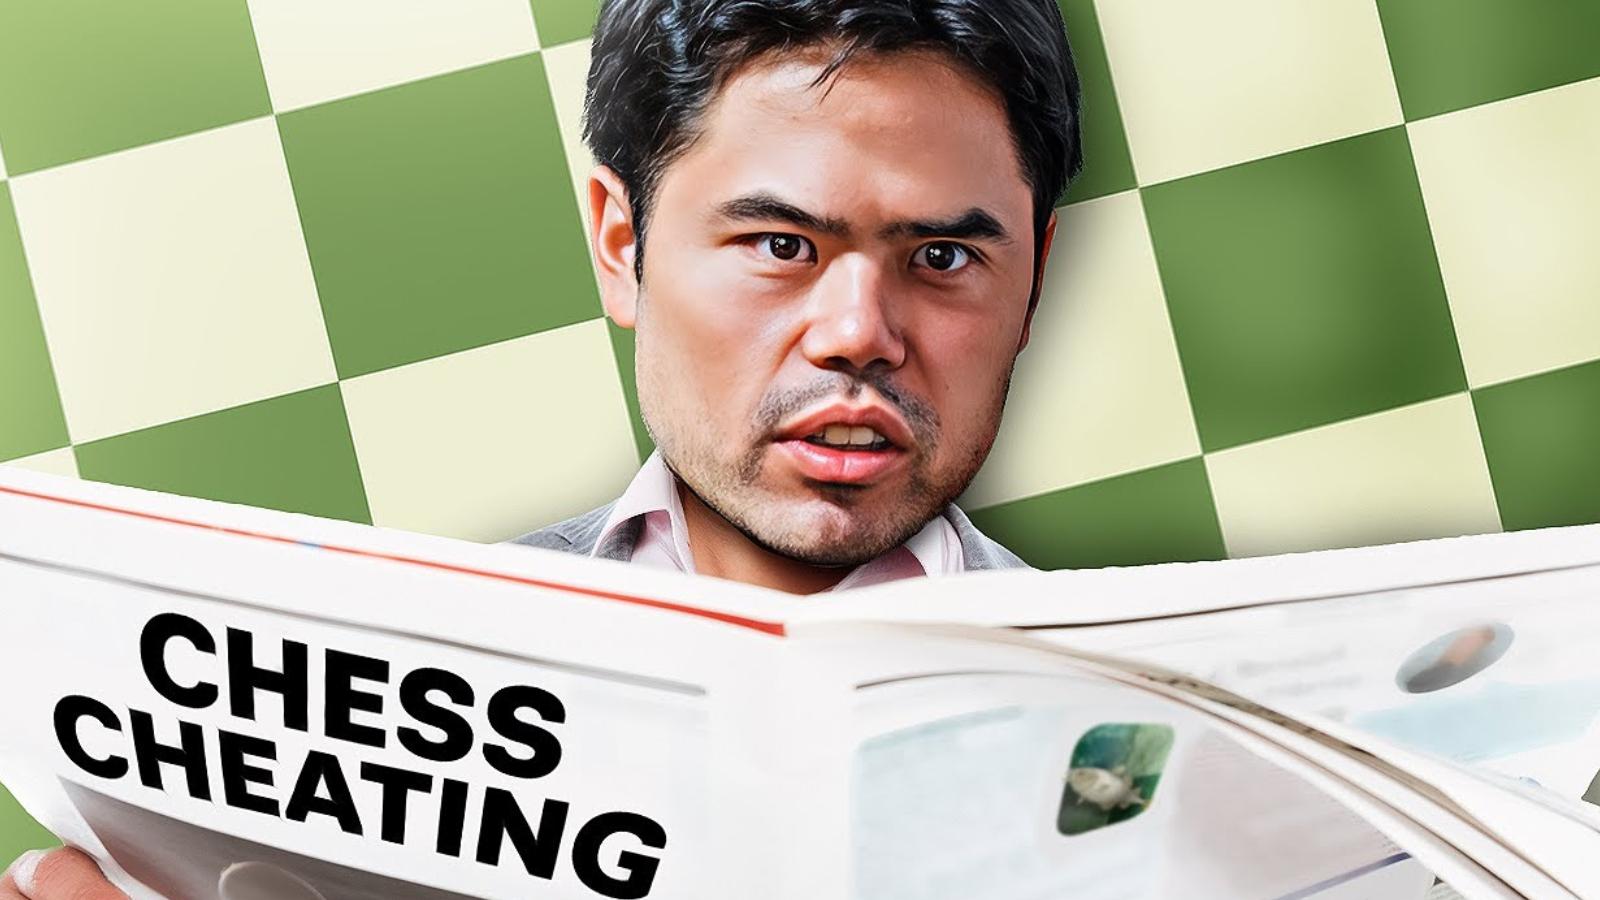 GM Hikaru strikes back at chess cheating accusations with “insane